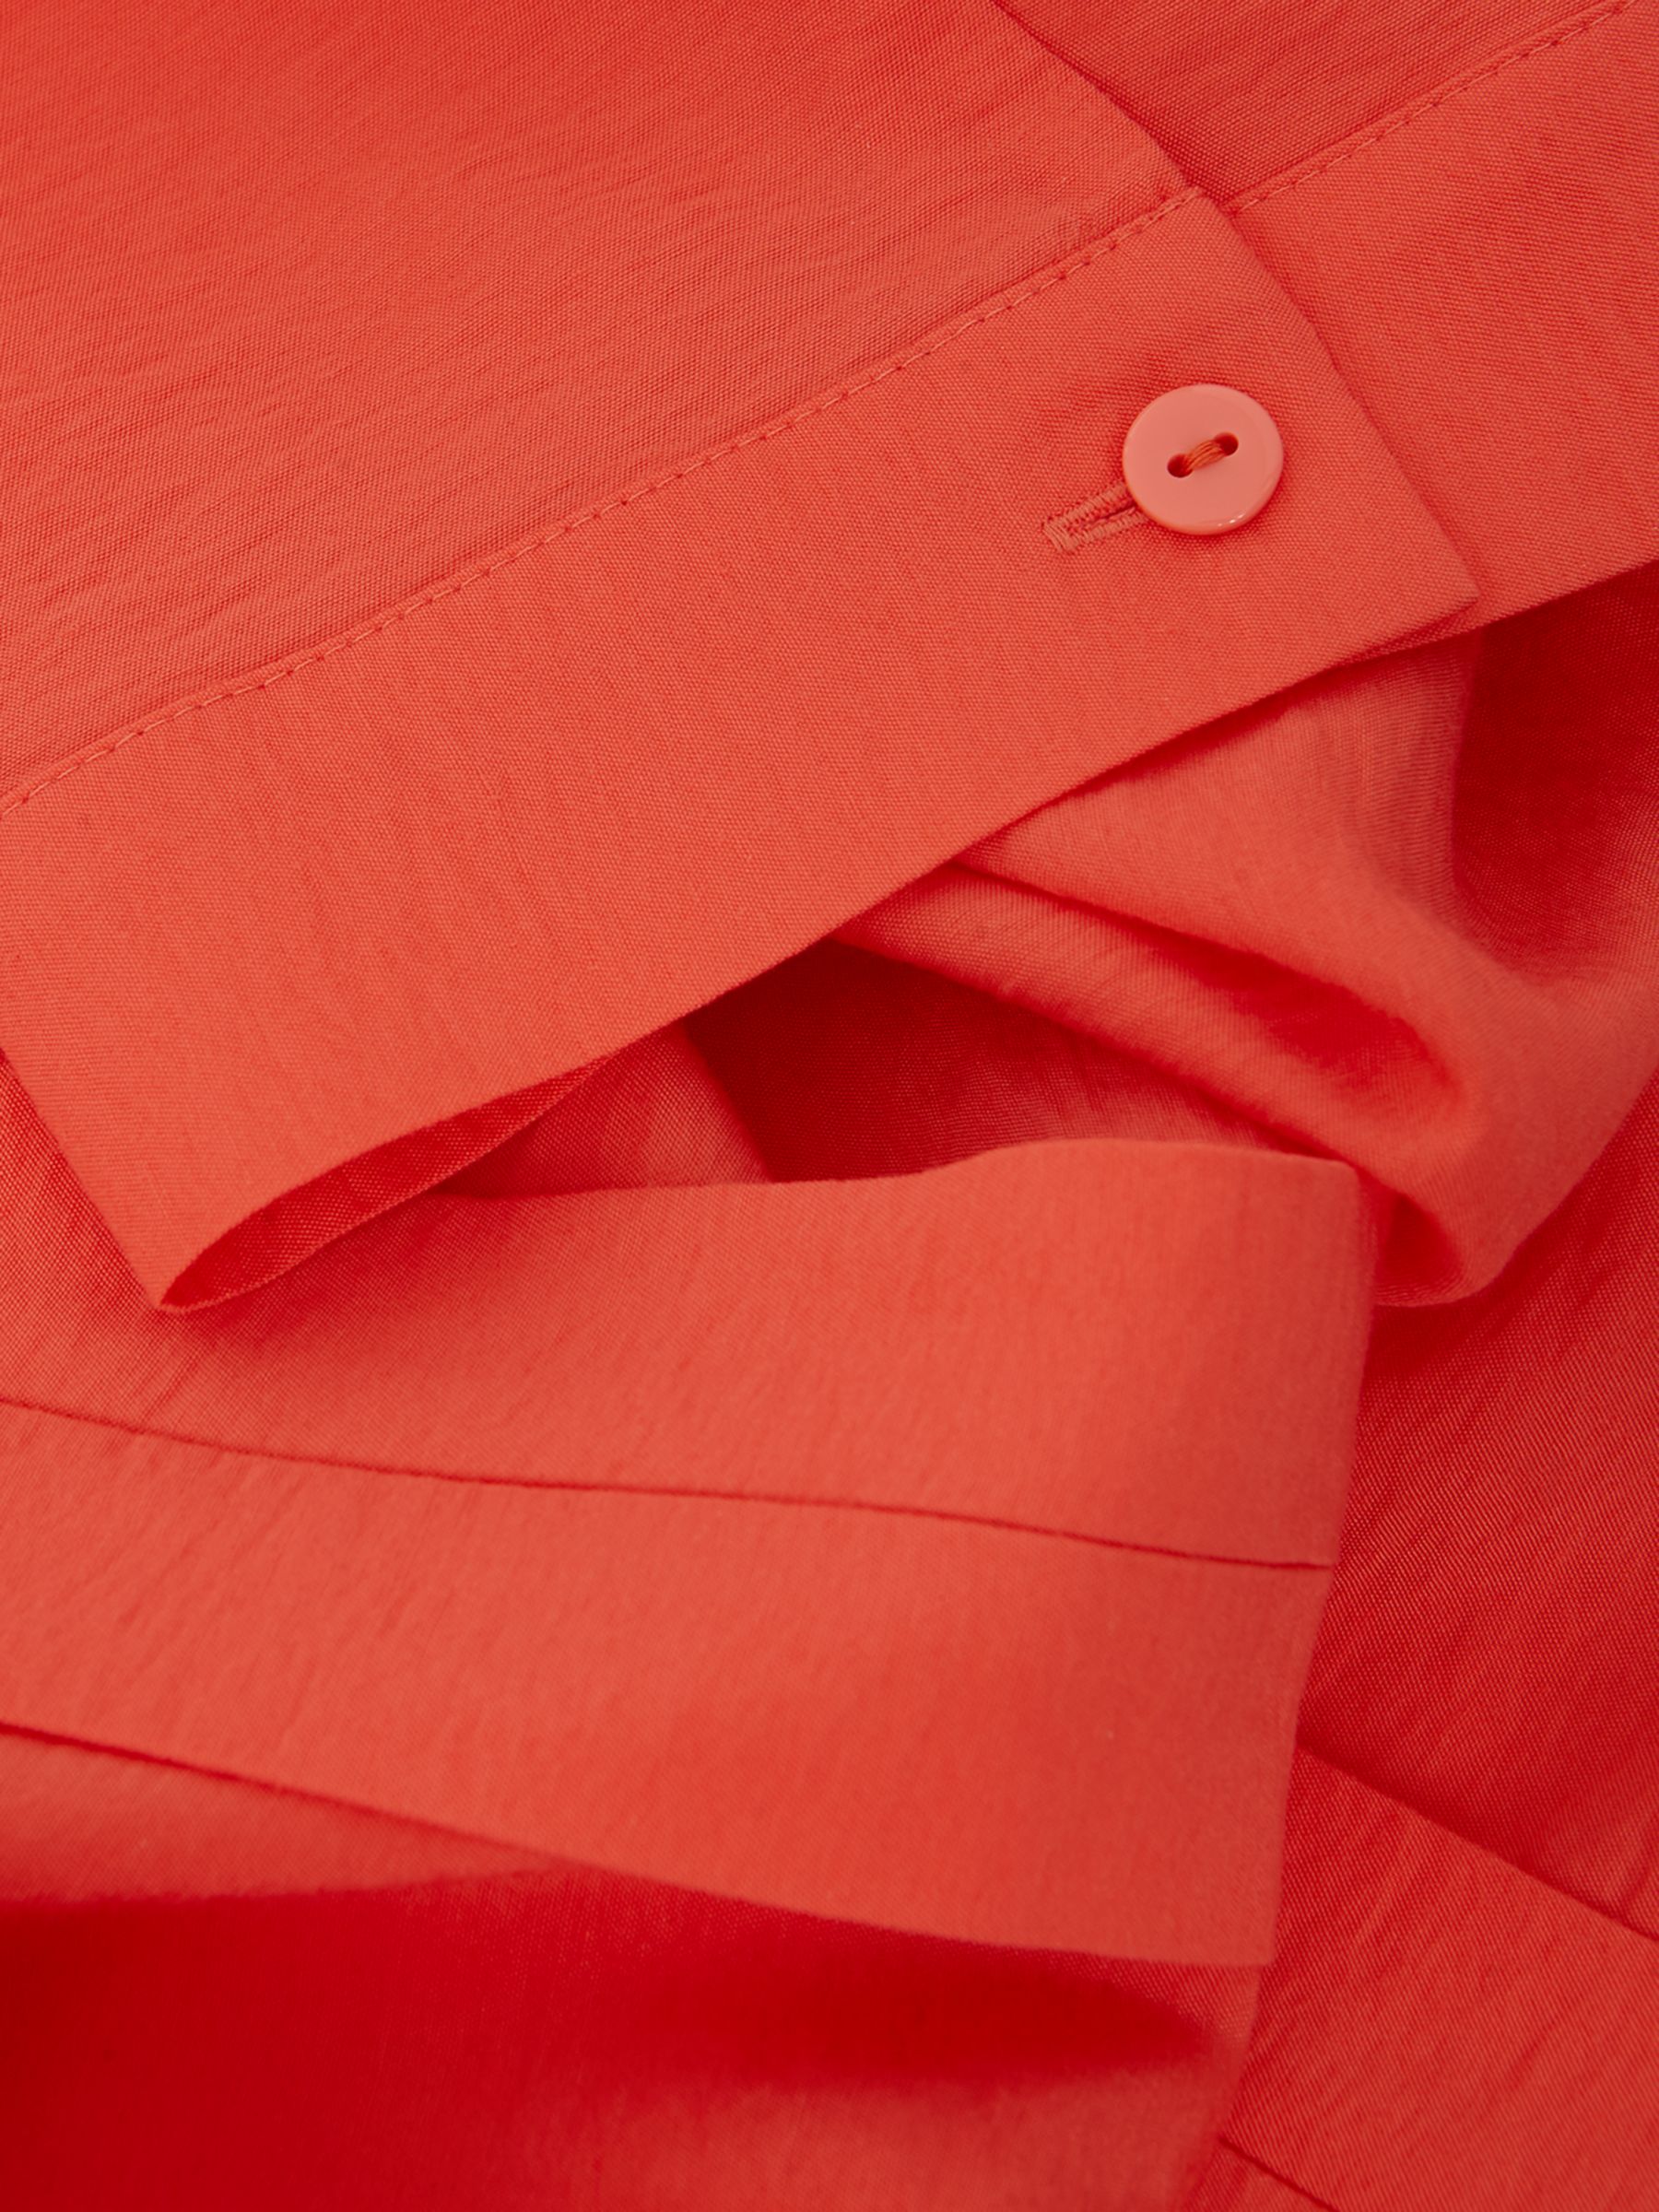 Buy Phase Eight Cynthia 3/4 Sleeve Shirt, Coral Online at johnlewis.com